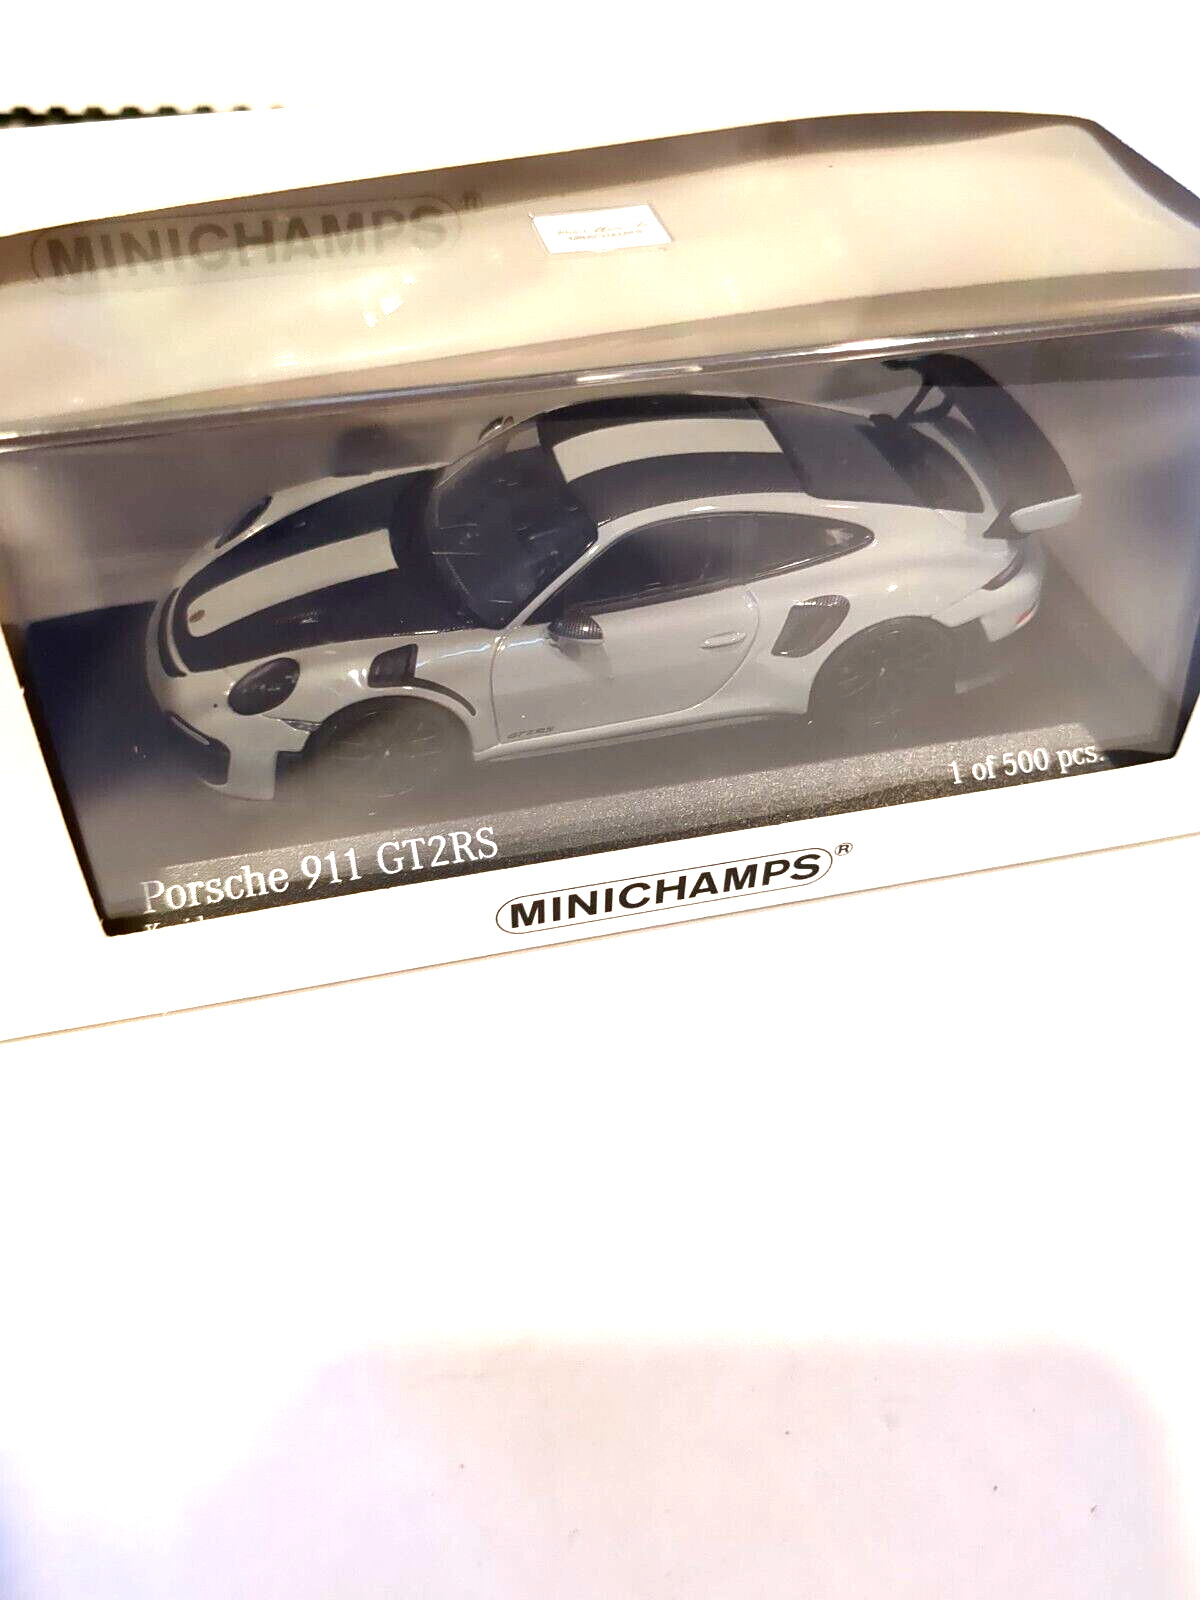 MINICHAMPS 911 GT 2RS Chalk Gray Weissach Package 1:43 1OF 500